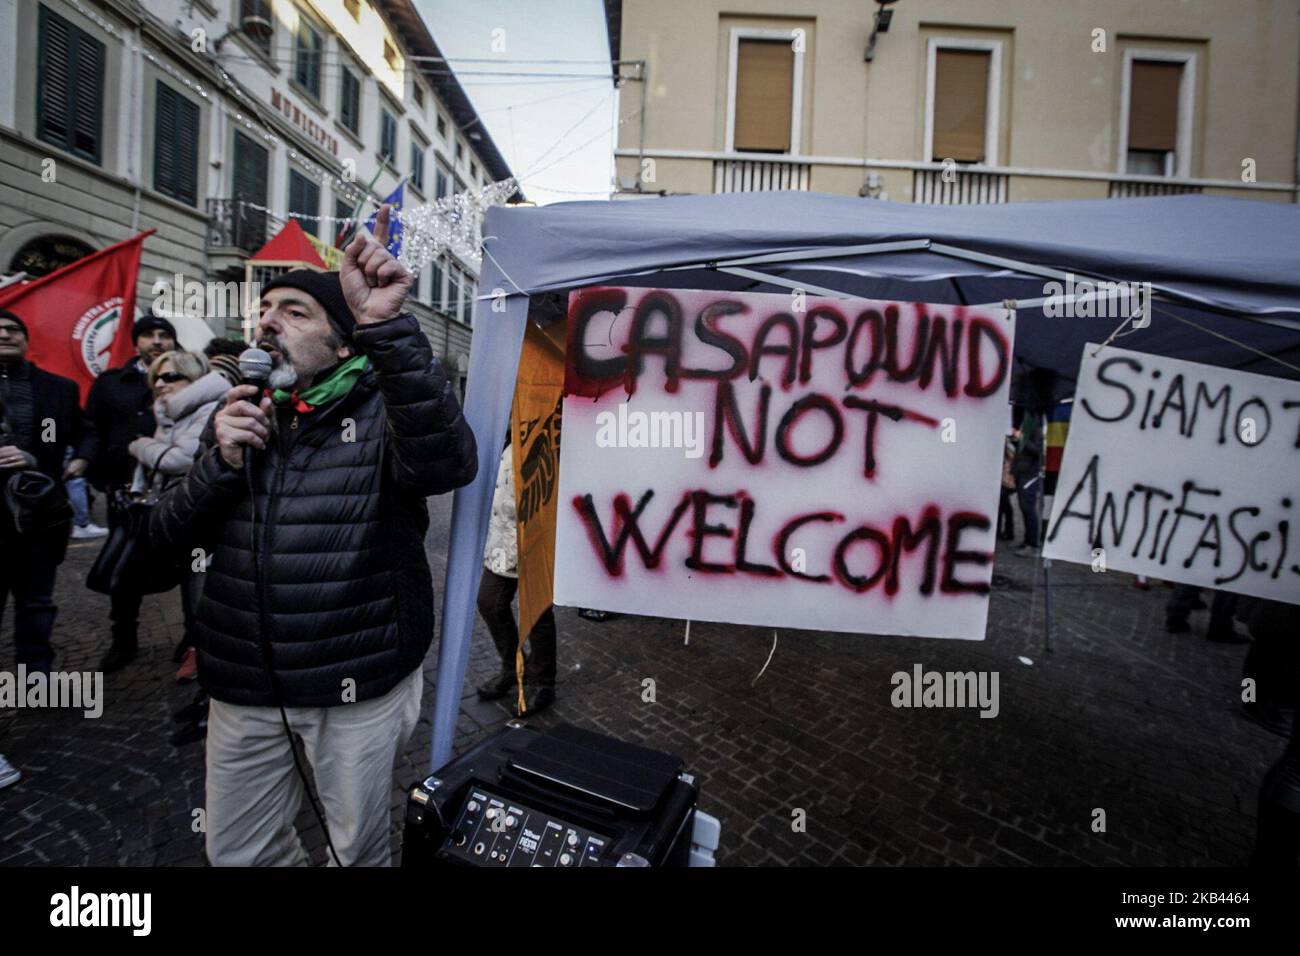 The opening of the headquarter of Casapound a neofascist party in Pontedera a province of Pisa, Italy, on 15 December 2018 call to a protest and a mobilization of the leftist parties and associations (Photo by Enrico Mattia Del Punta/NurPhoto) Stock Photo